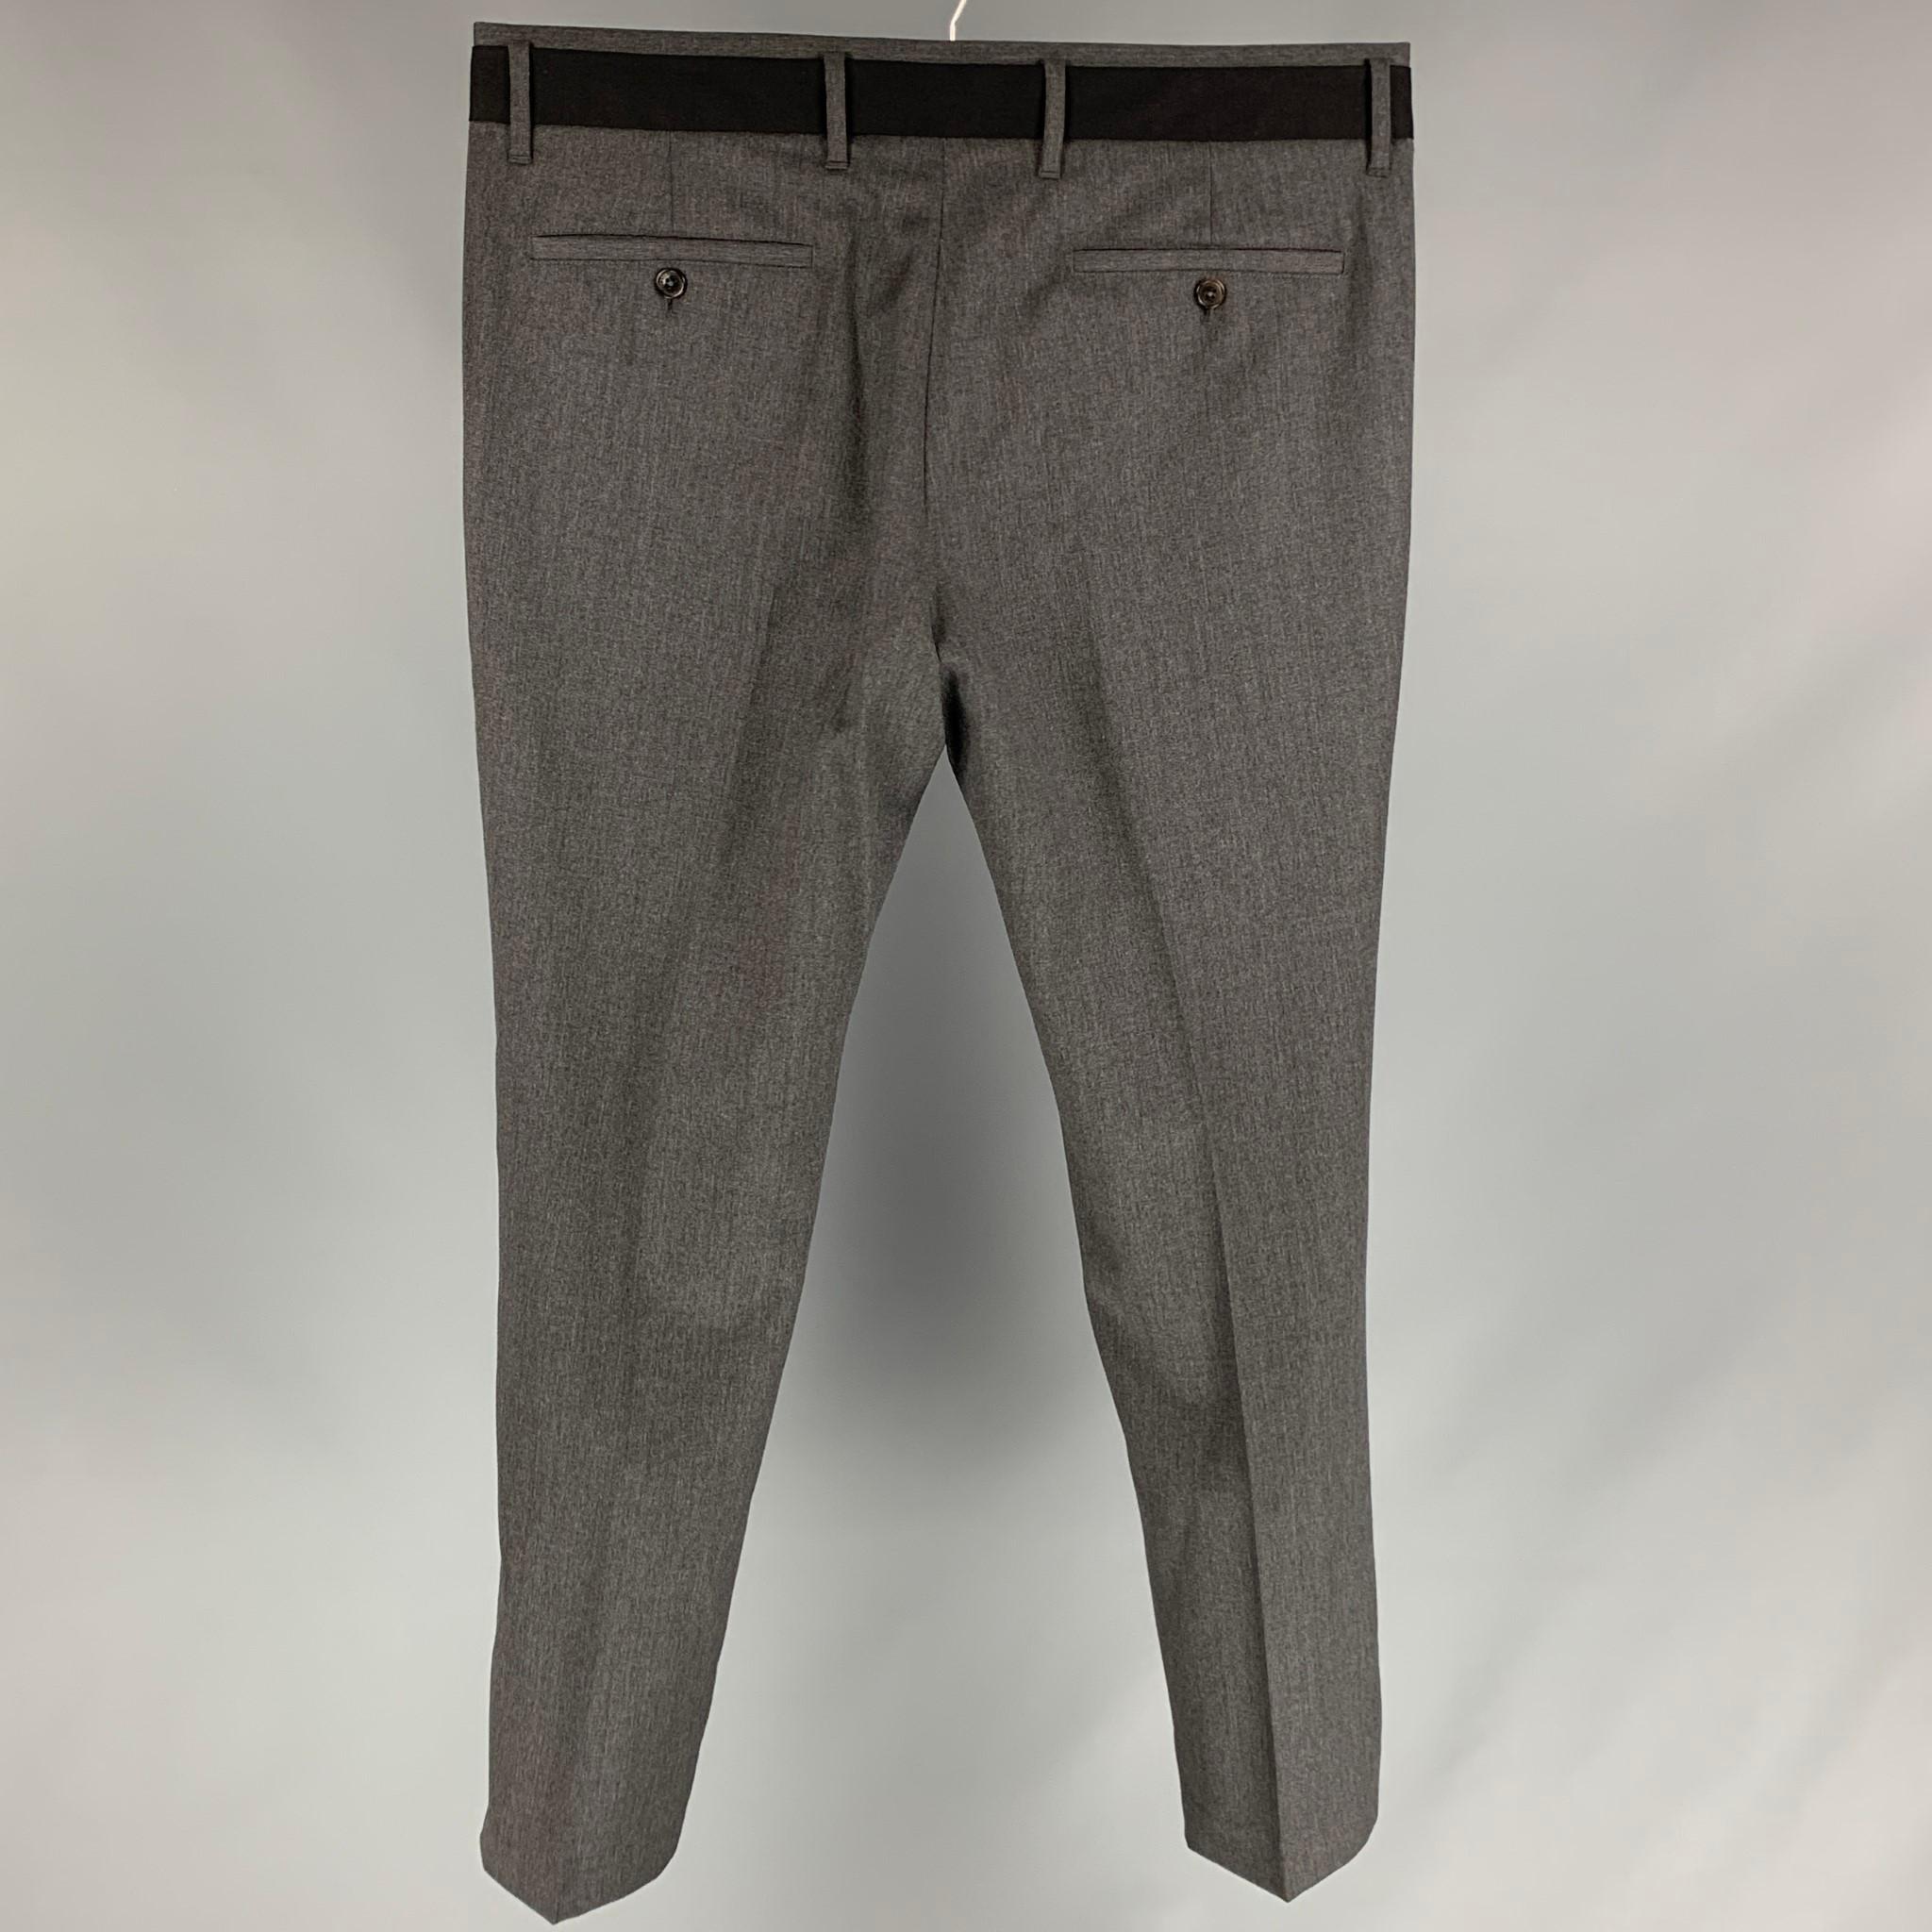 VIKTOR & ROLF tuxedo dress pants comes in a dark gray & black wool featuring a flat front, slim fit, front tab, and a zip fly closure. Made in Italy. 

Excellent Pre-Owned Condition.
Marked: 52

Measurements:

Waist: 36 in.
Rise: 9.5 in.
Inseam: 32